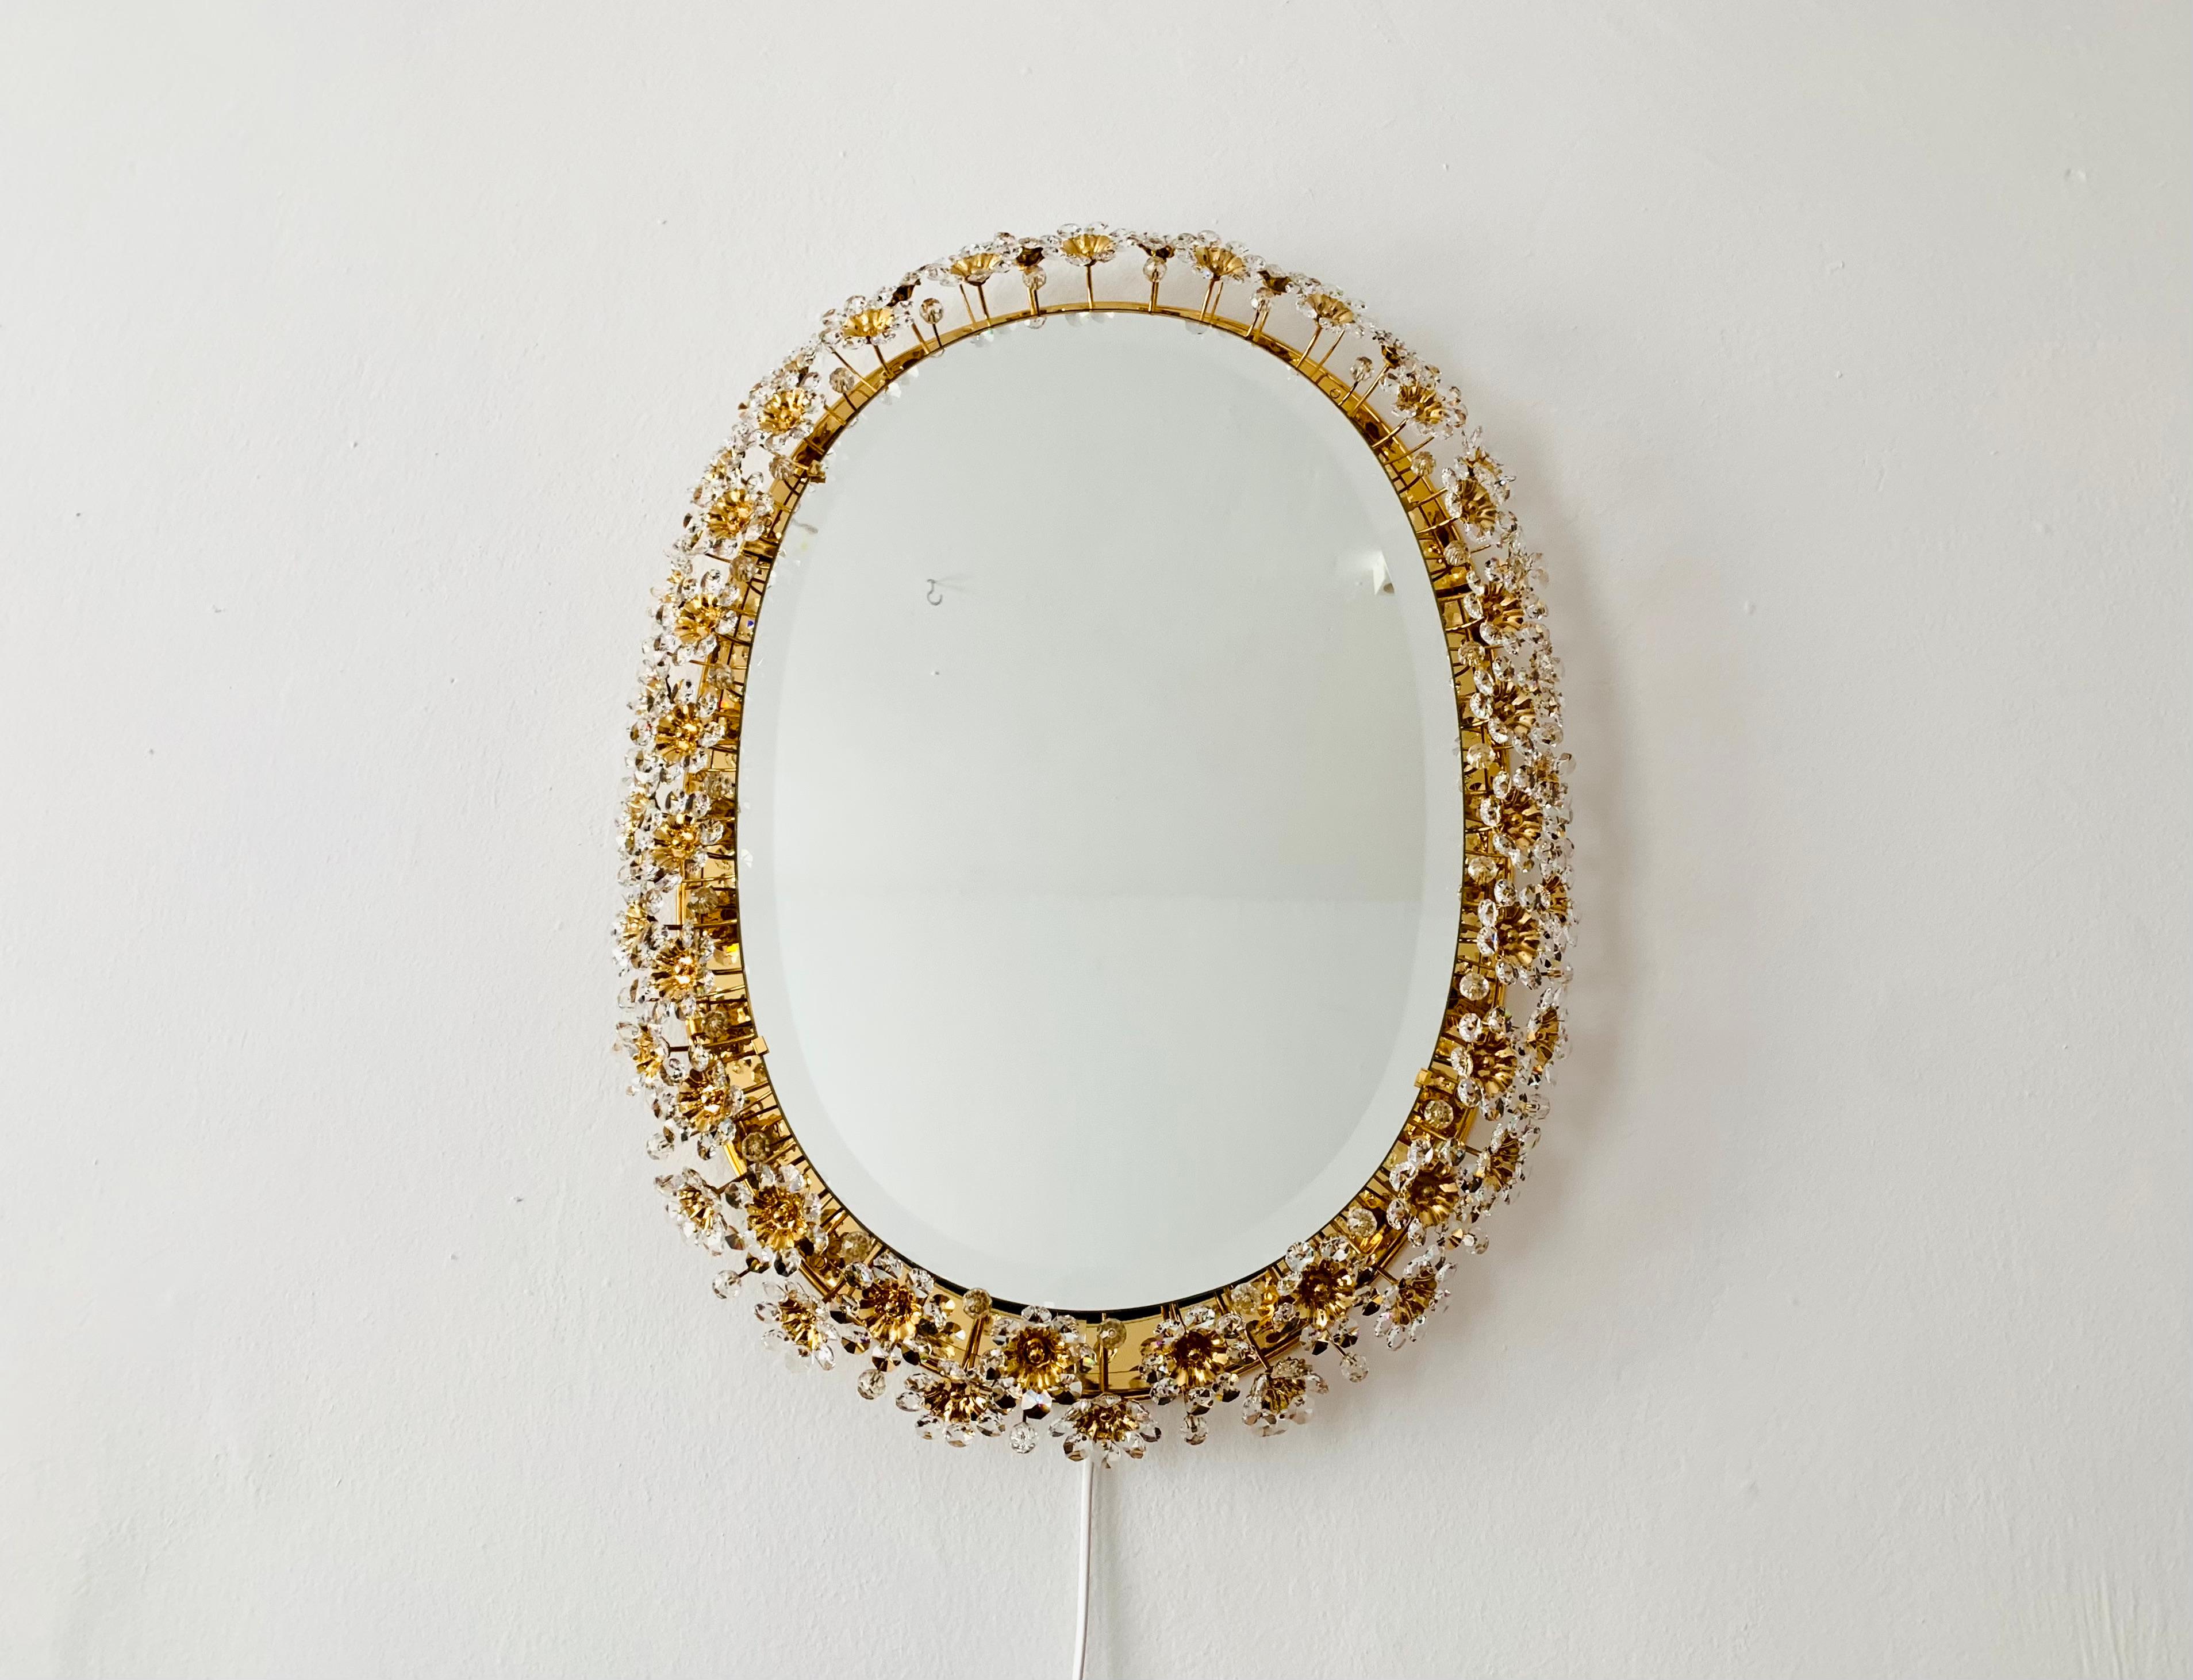 Wonderful and very luxurious mirror by Palwa from the 1960s.
The frame with the lavishly decorated crystal glass flowers sparkles particularly beautifully.
A stunning mirror and a real addition to any home.
A spectacular play of light is created in